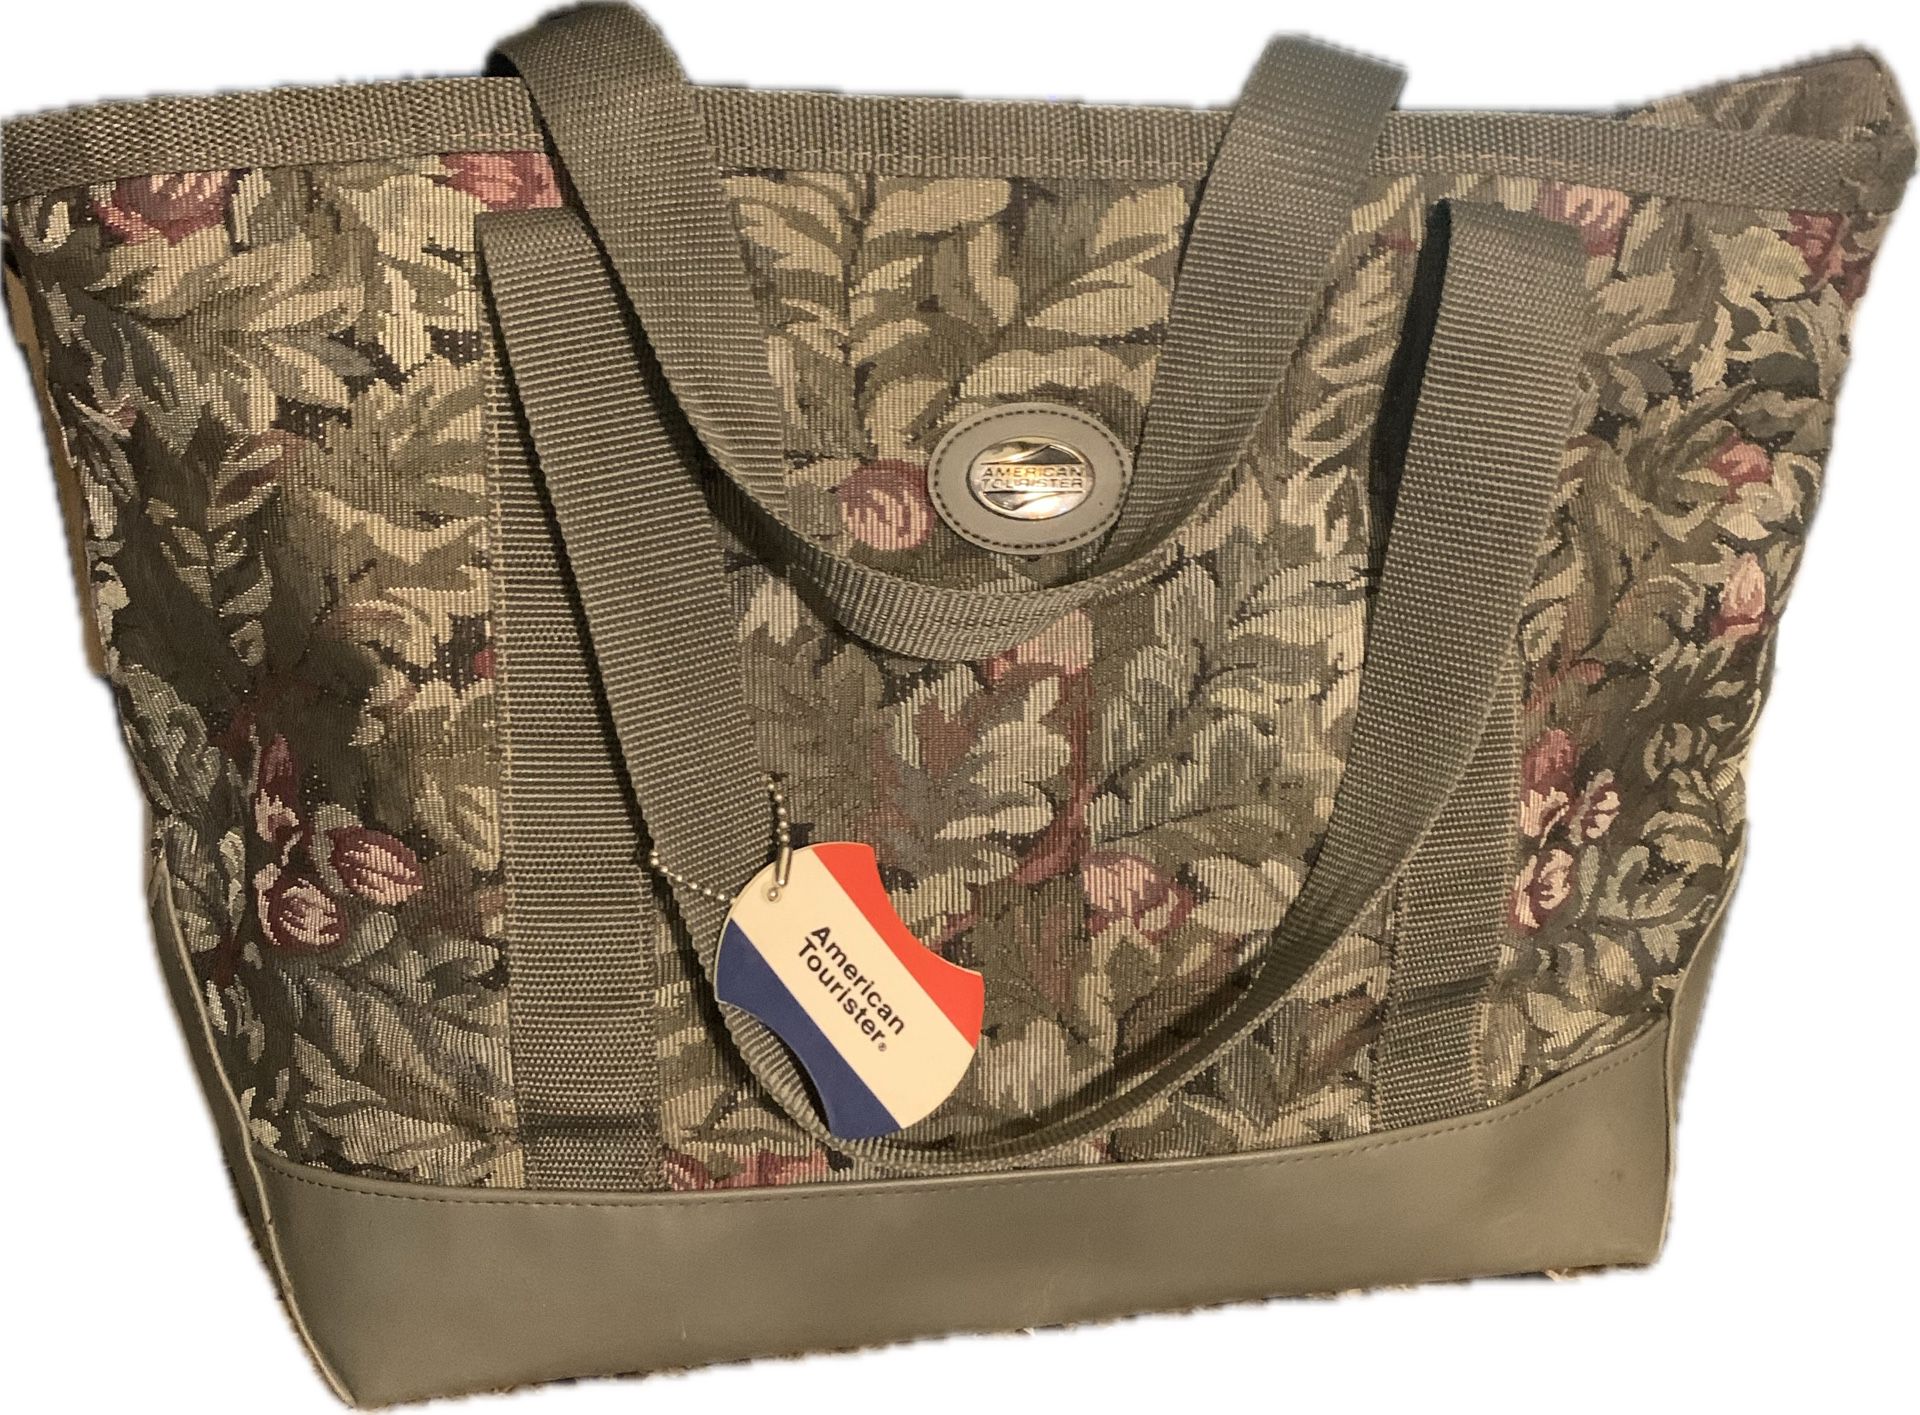 American Tourister Tapestry Tote, Satchel, Top Zip, Carry On, Avon